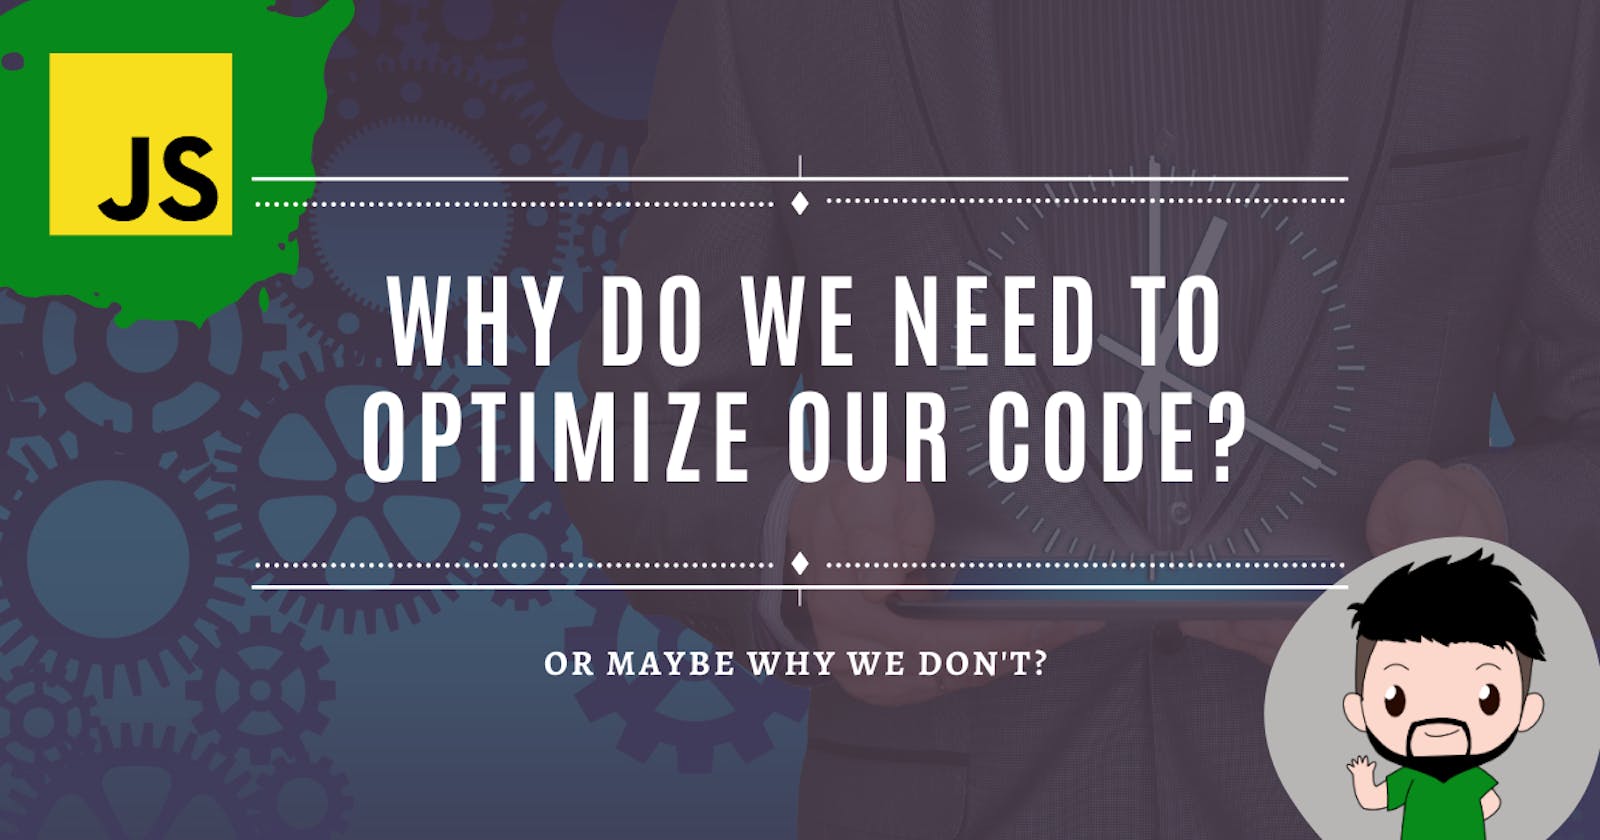 Why do we need to Optimize our code?